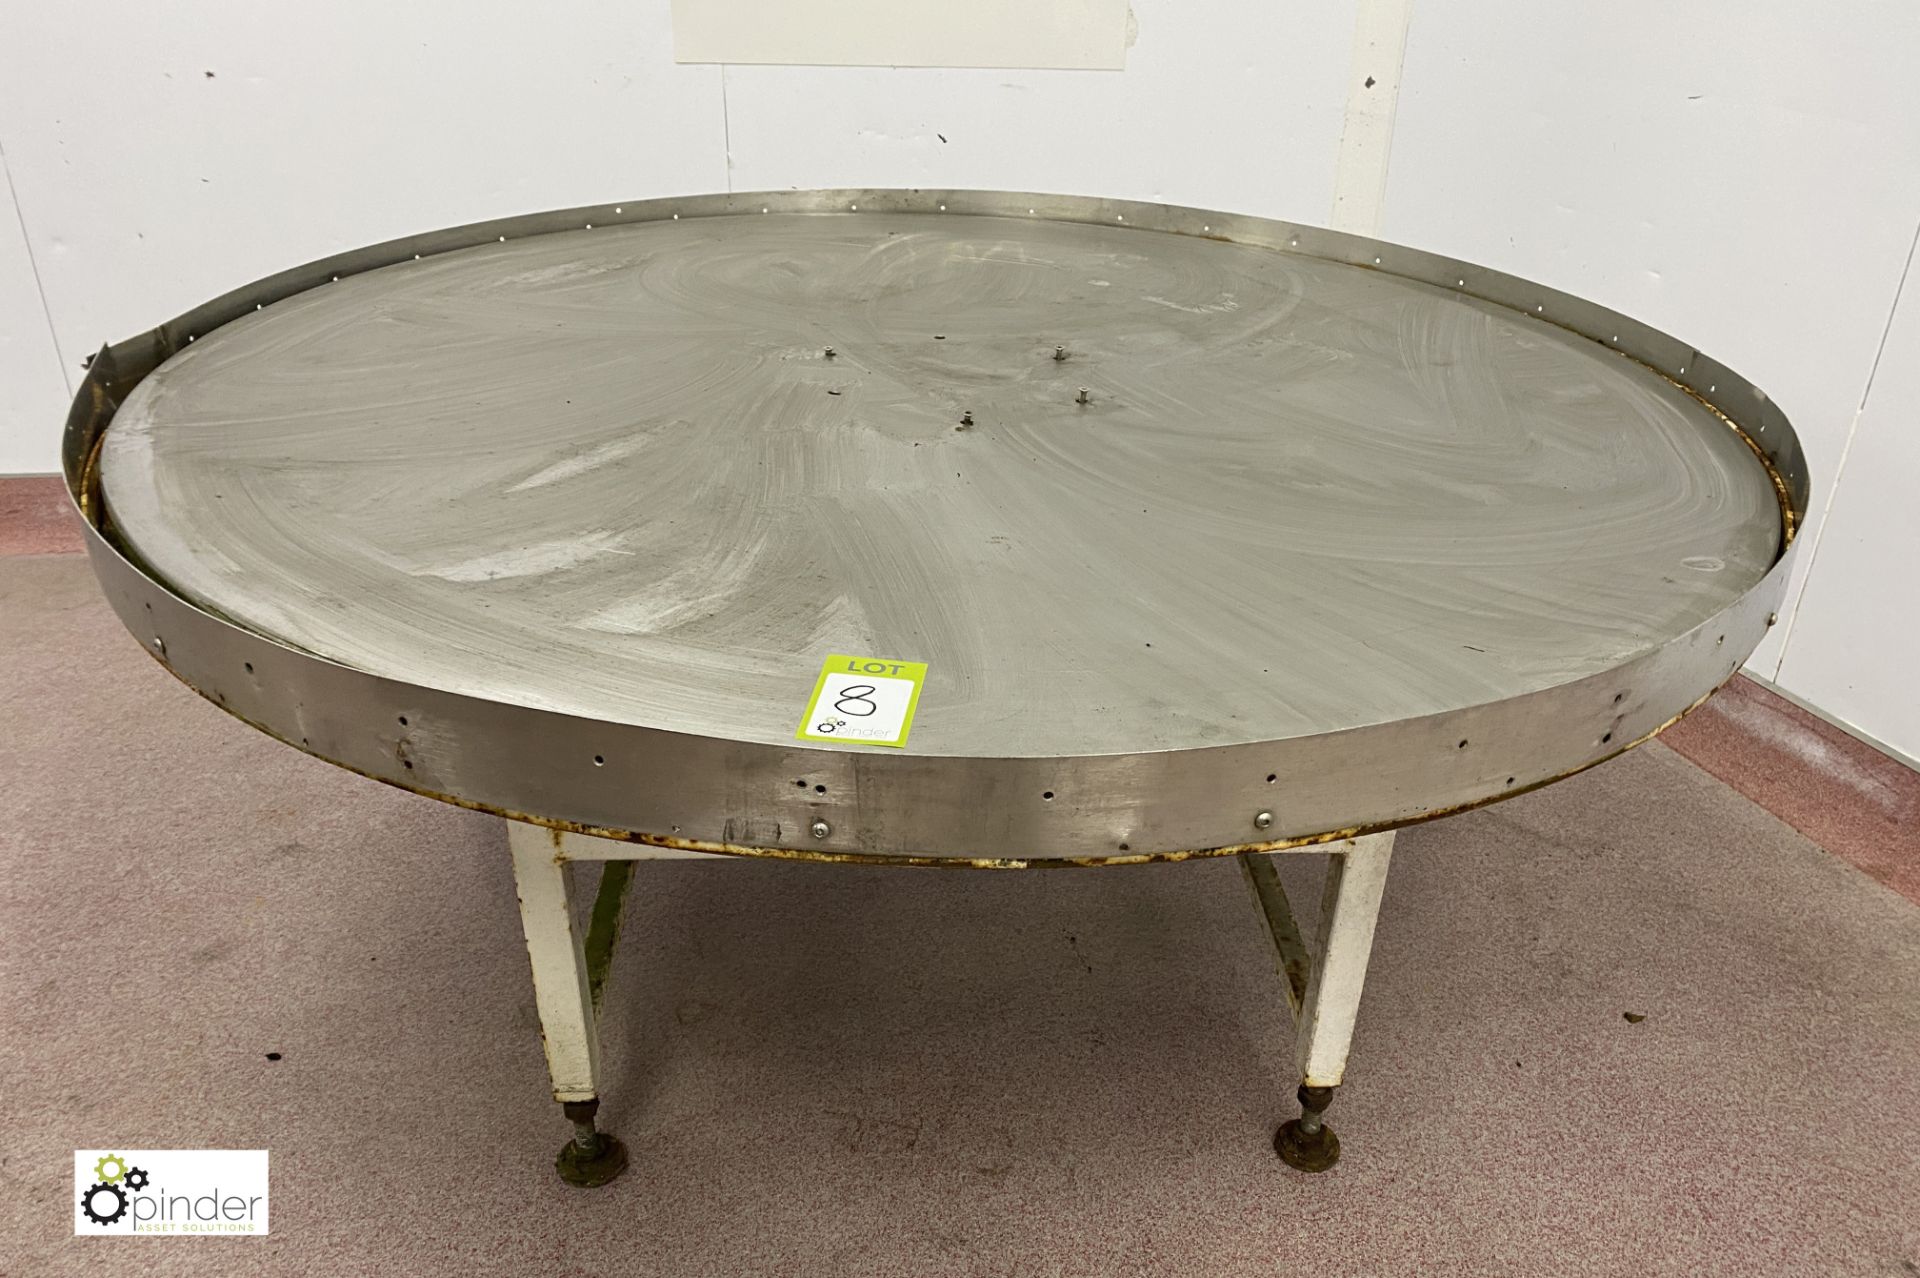 Stainless steel Lazy Susan, 1480mm diameter x 700mm high (please note there is a lift out fee of £10